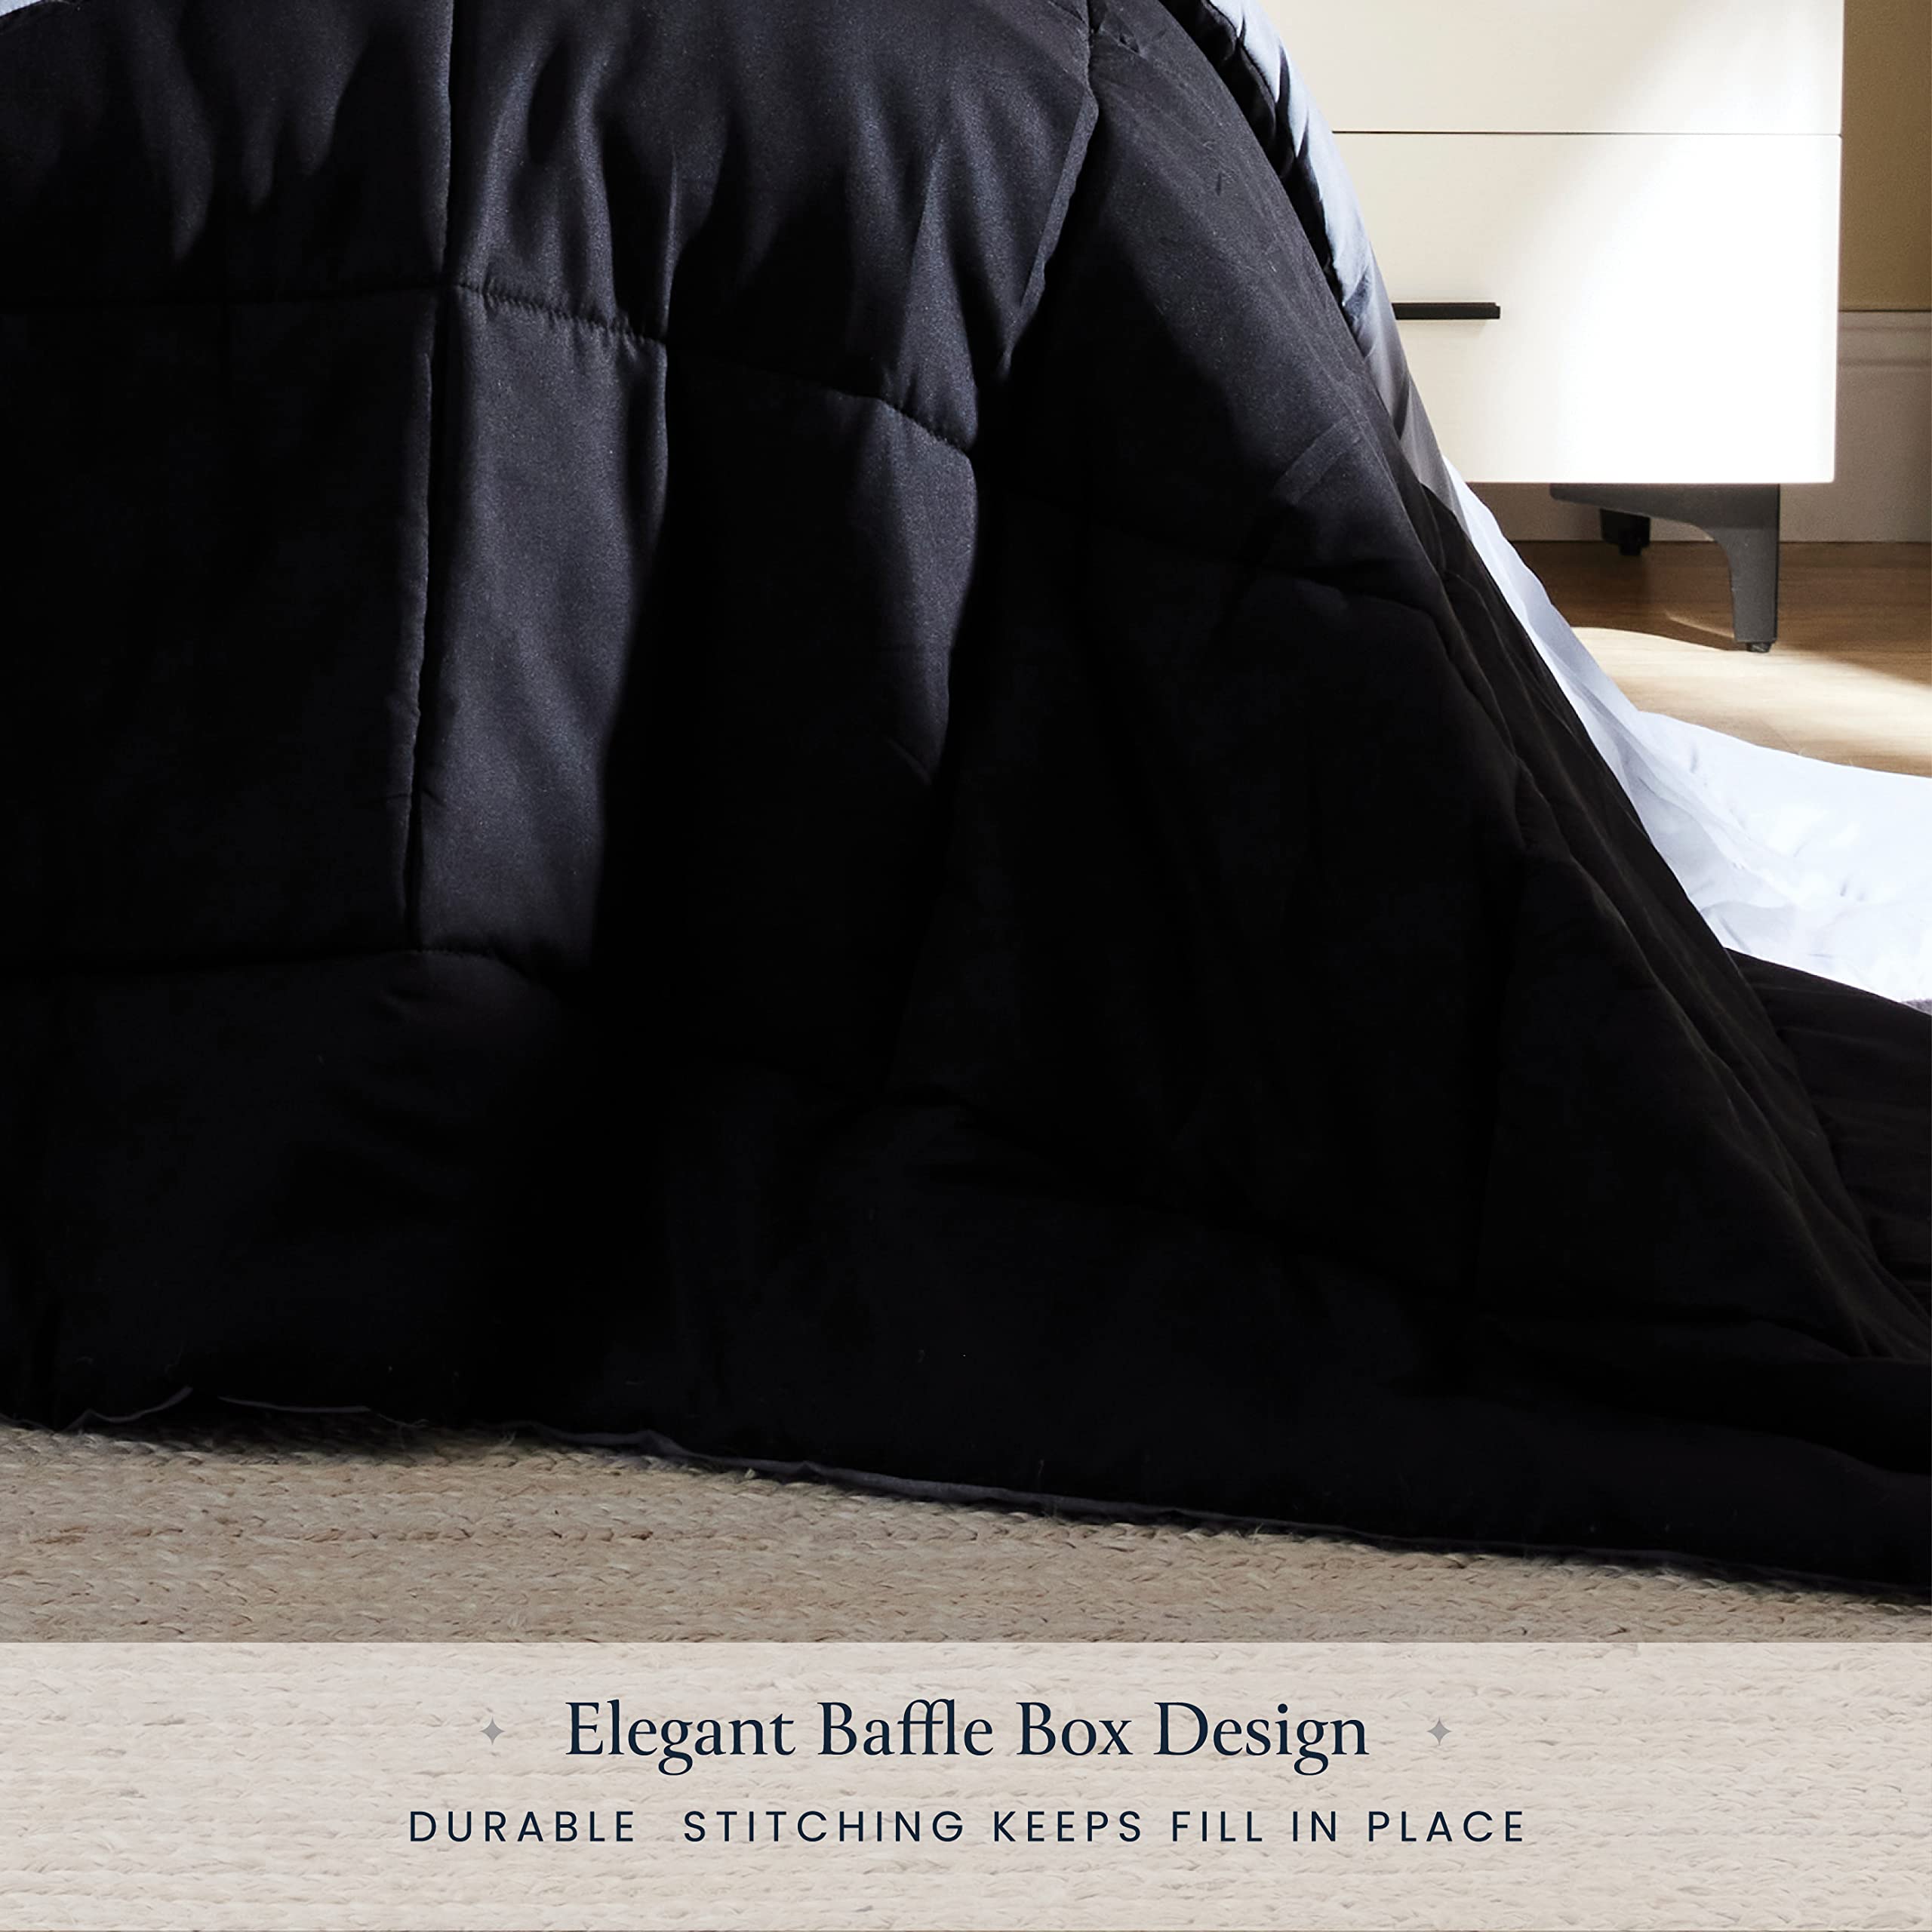 Down-Alternative Comforter Duvet Insert - All-Season Mid-Plush Cooling Comforter - Perfect for Hot Sleepers - Soft & Fluffy Bed Comforter, Elegant Box Quilted Comforters  - Like New